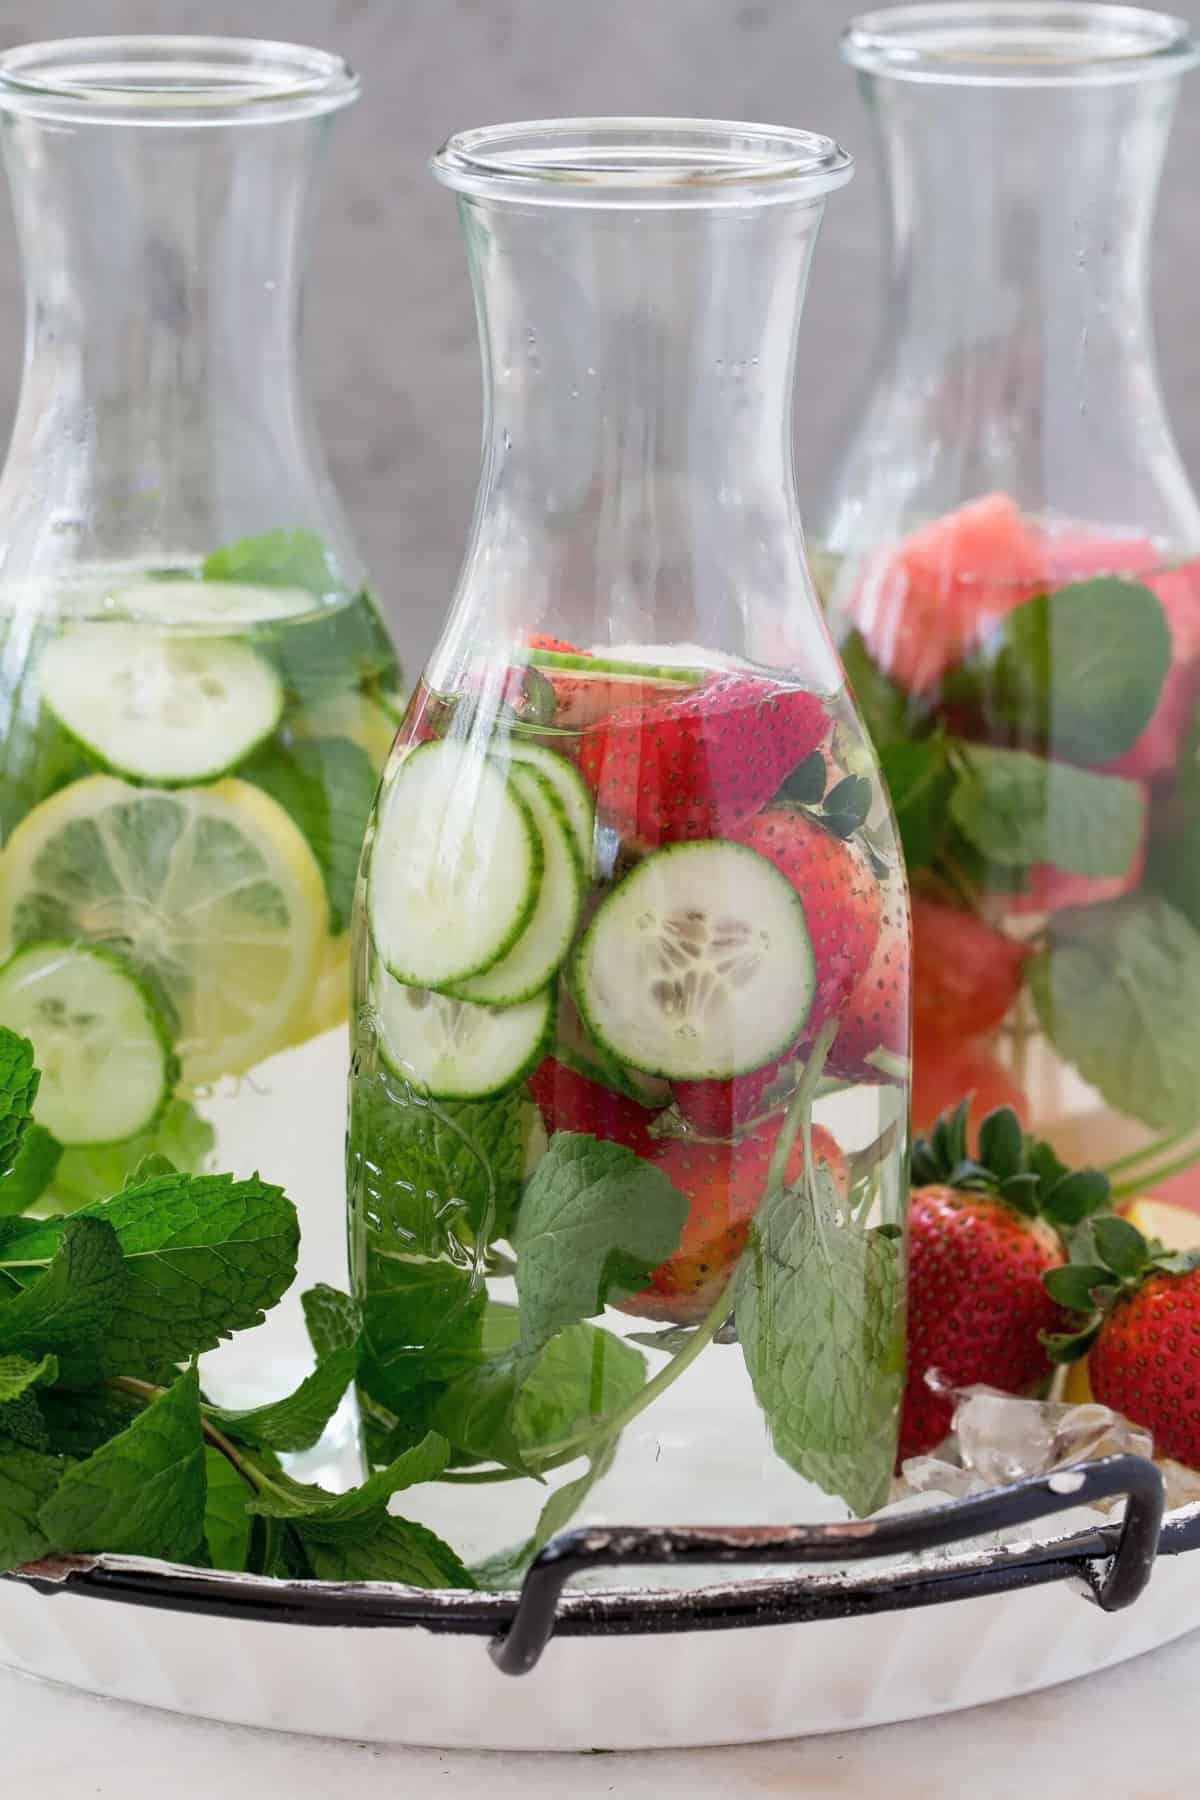 9 Infuser Water Bottle Recipes